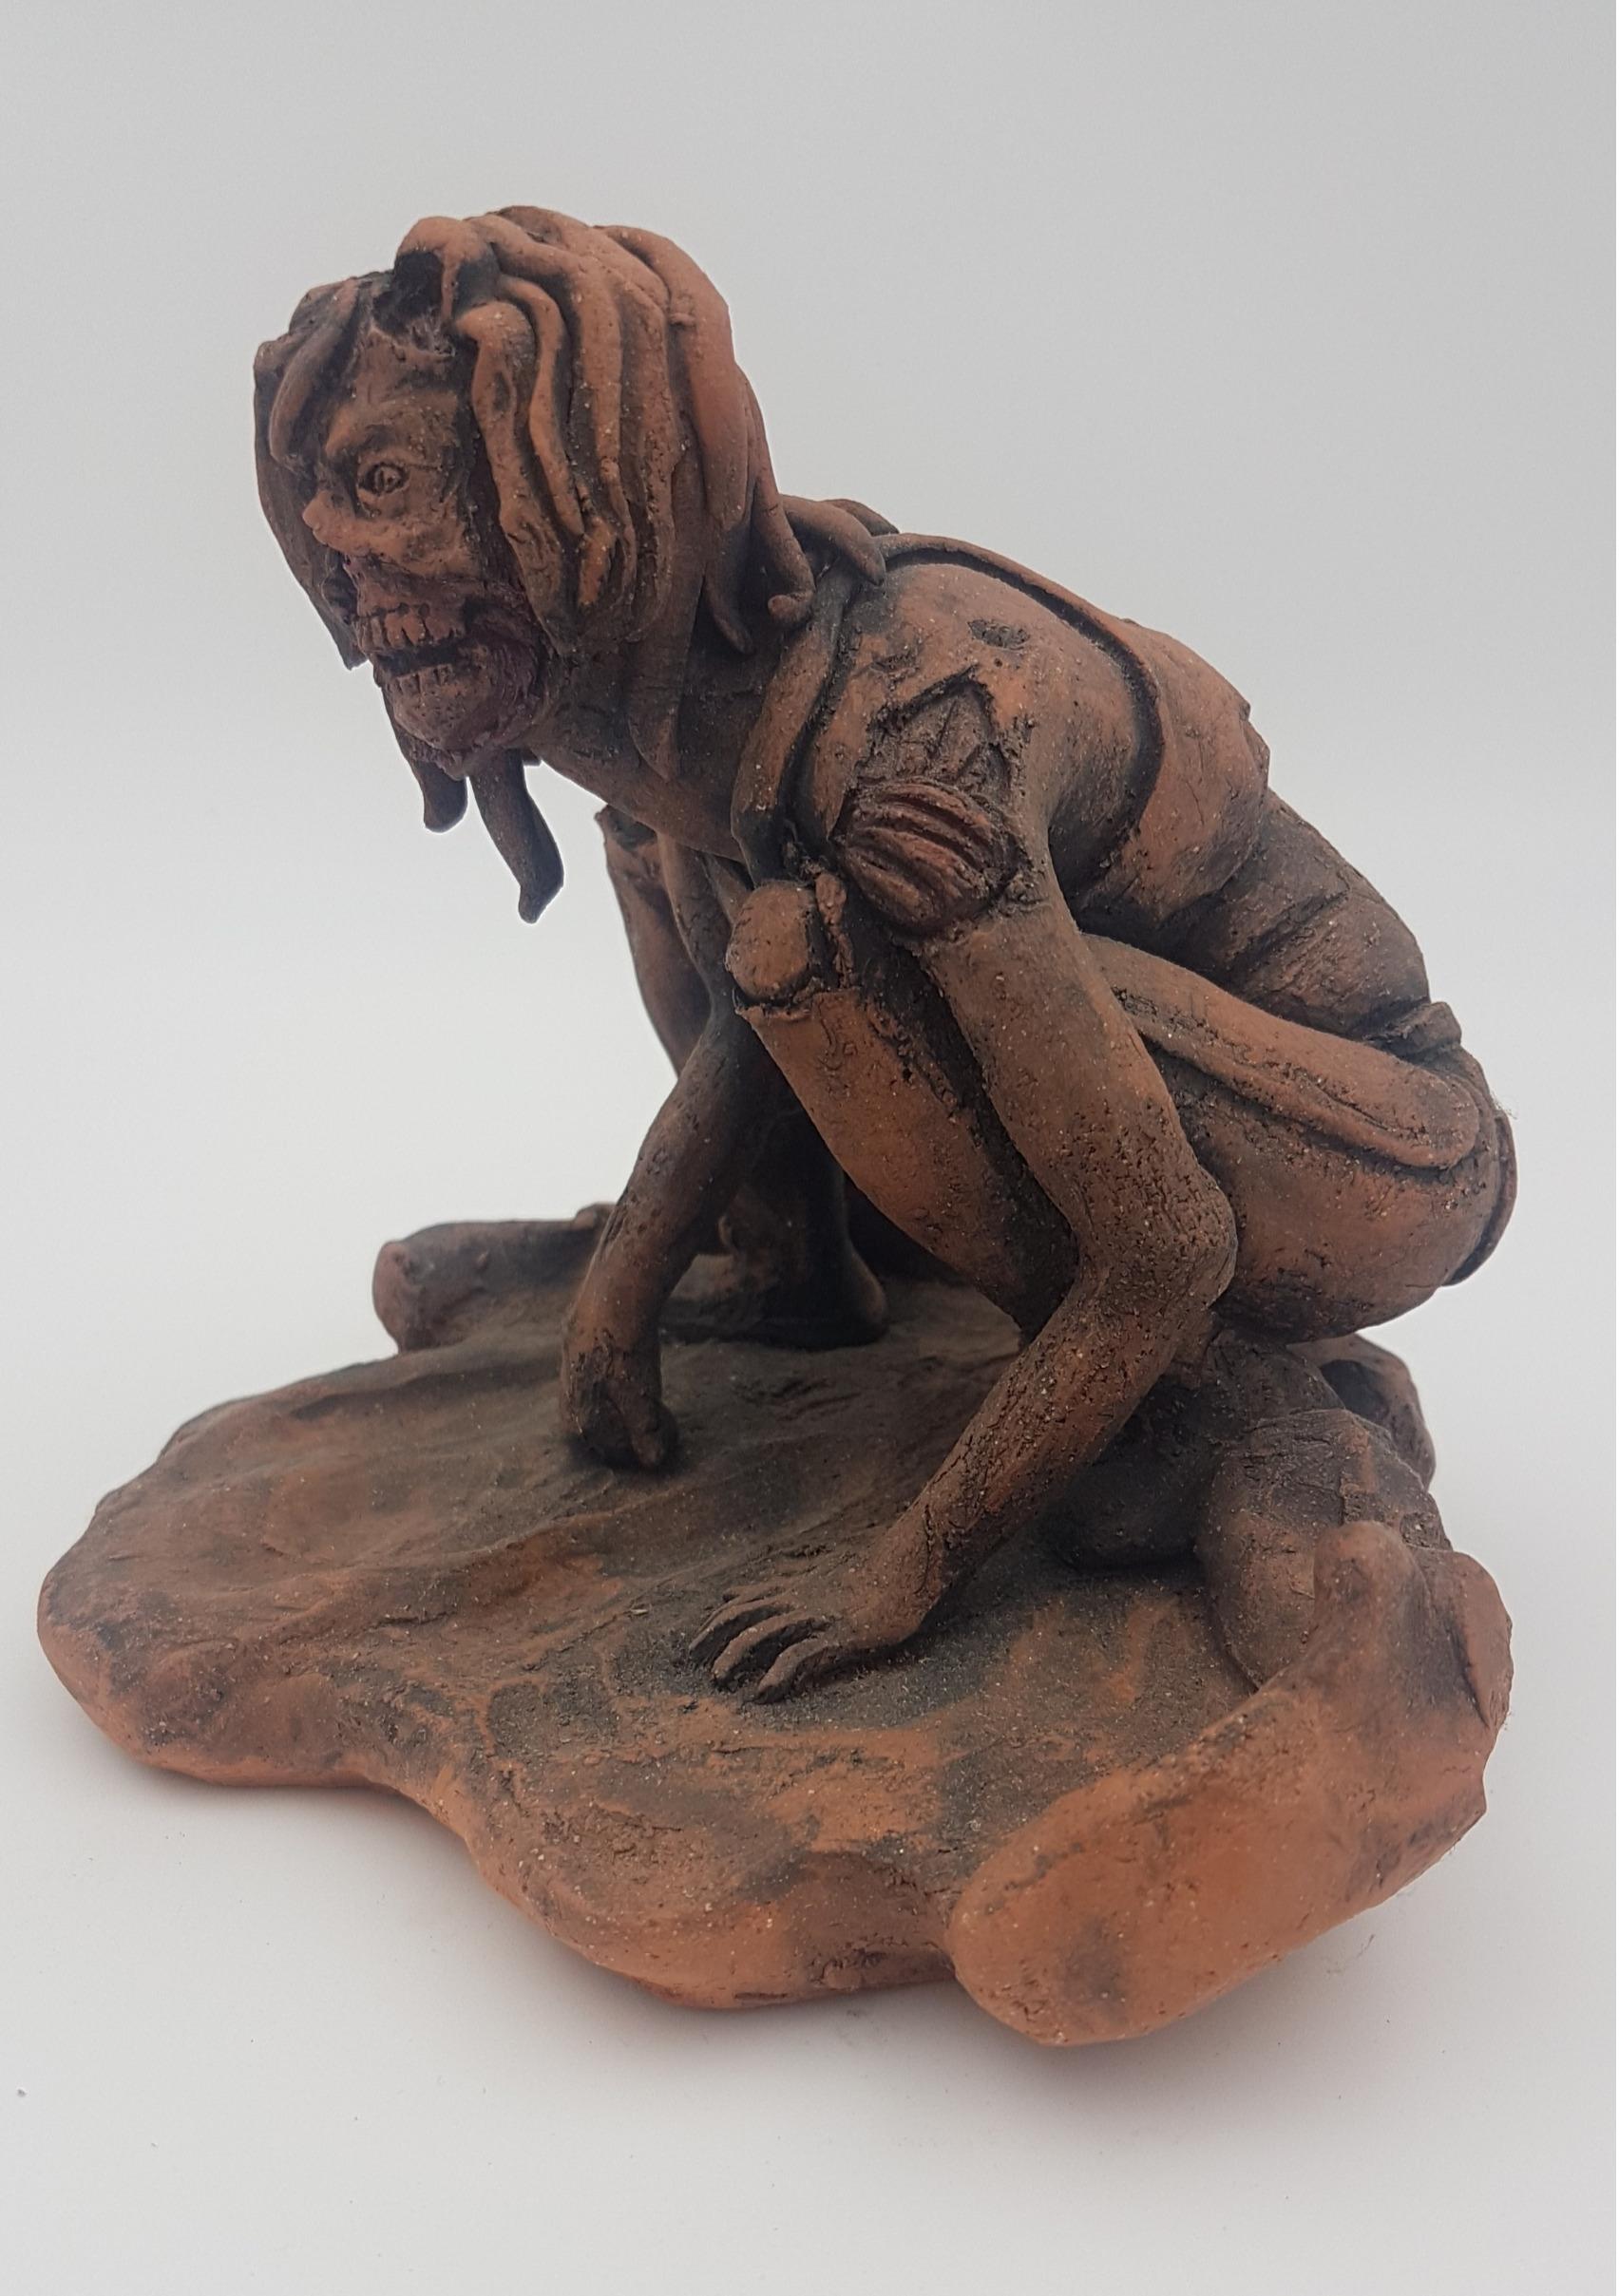 Kneeling Female Zombie - Sculpture by Amy Young